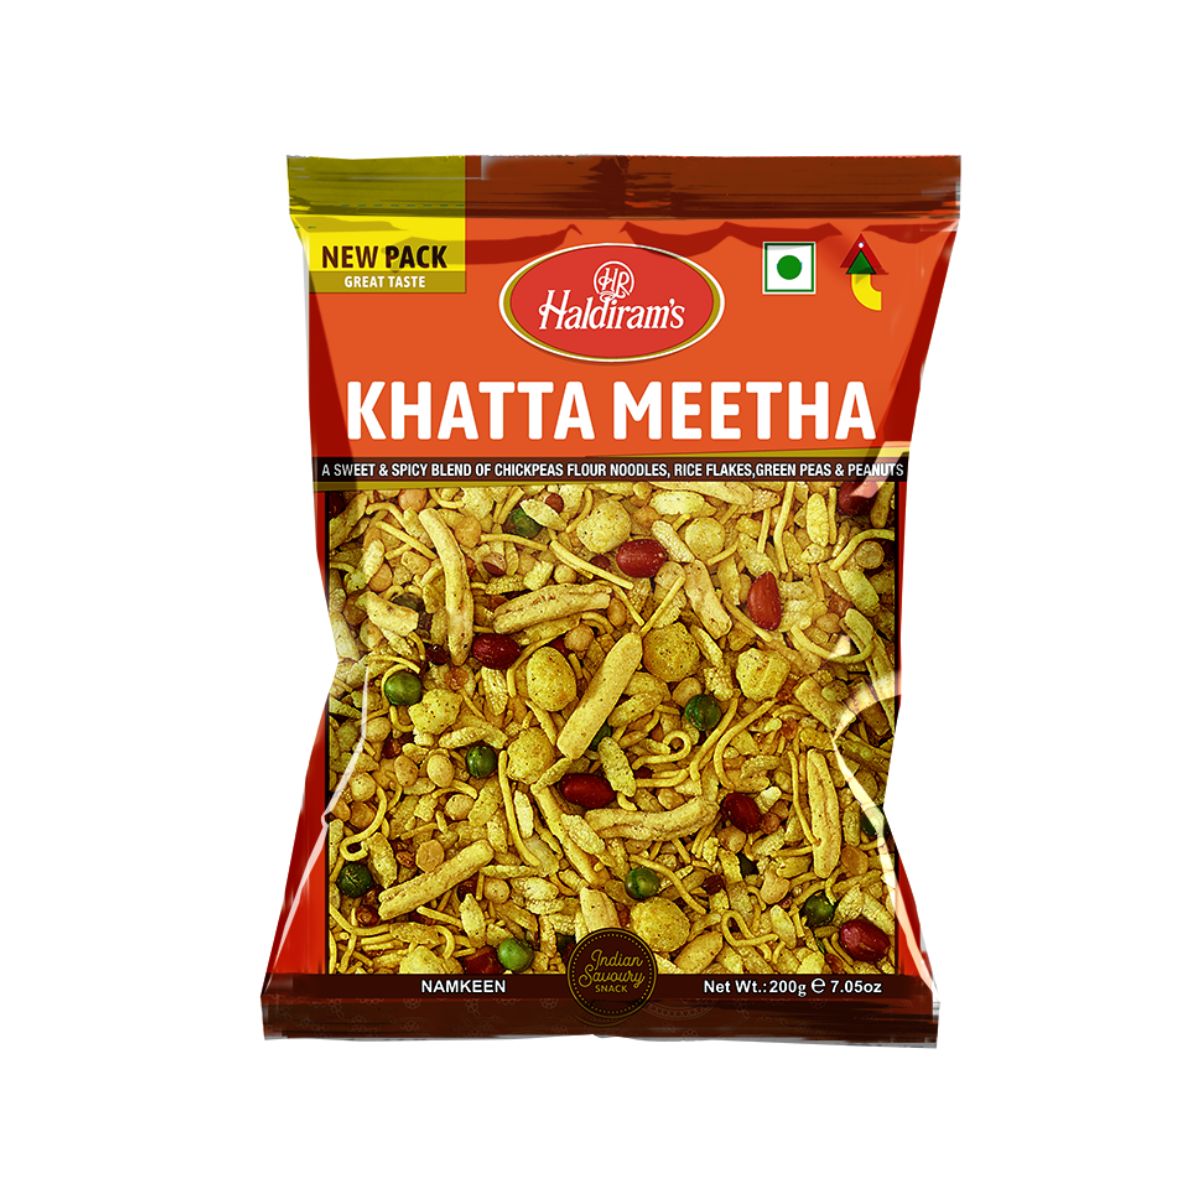 Haldiram's Khatta Meetha - A Sweet And Spicy Blend Of Chickpeas Flour Noodles, Rice Flakes, Green Peas And Peanuts - 200g